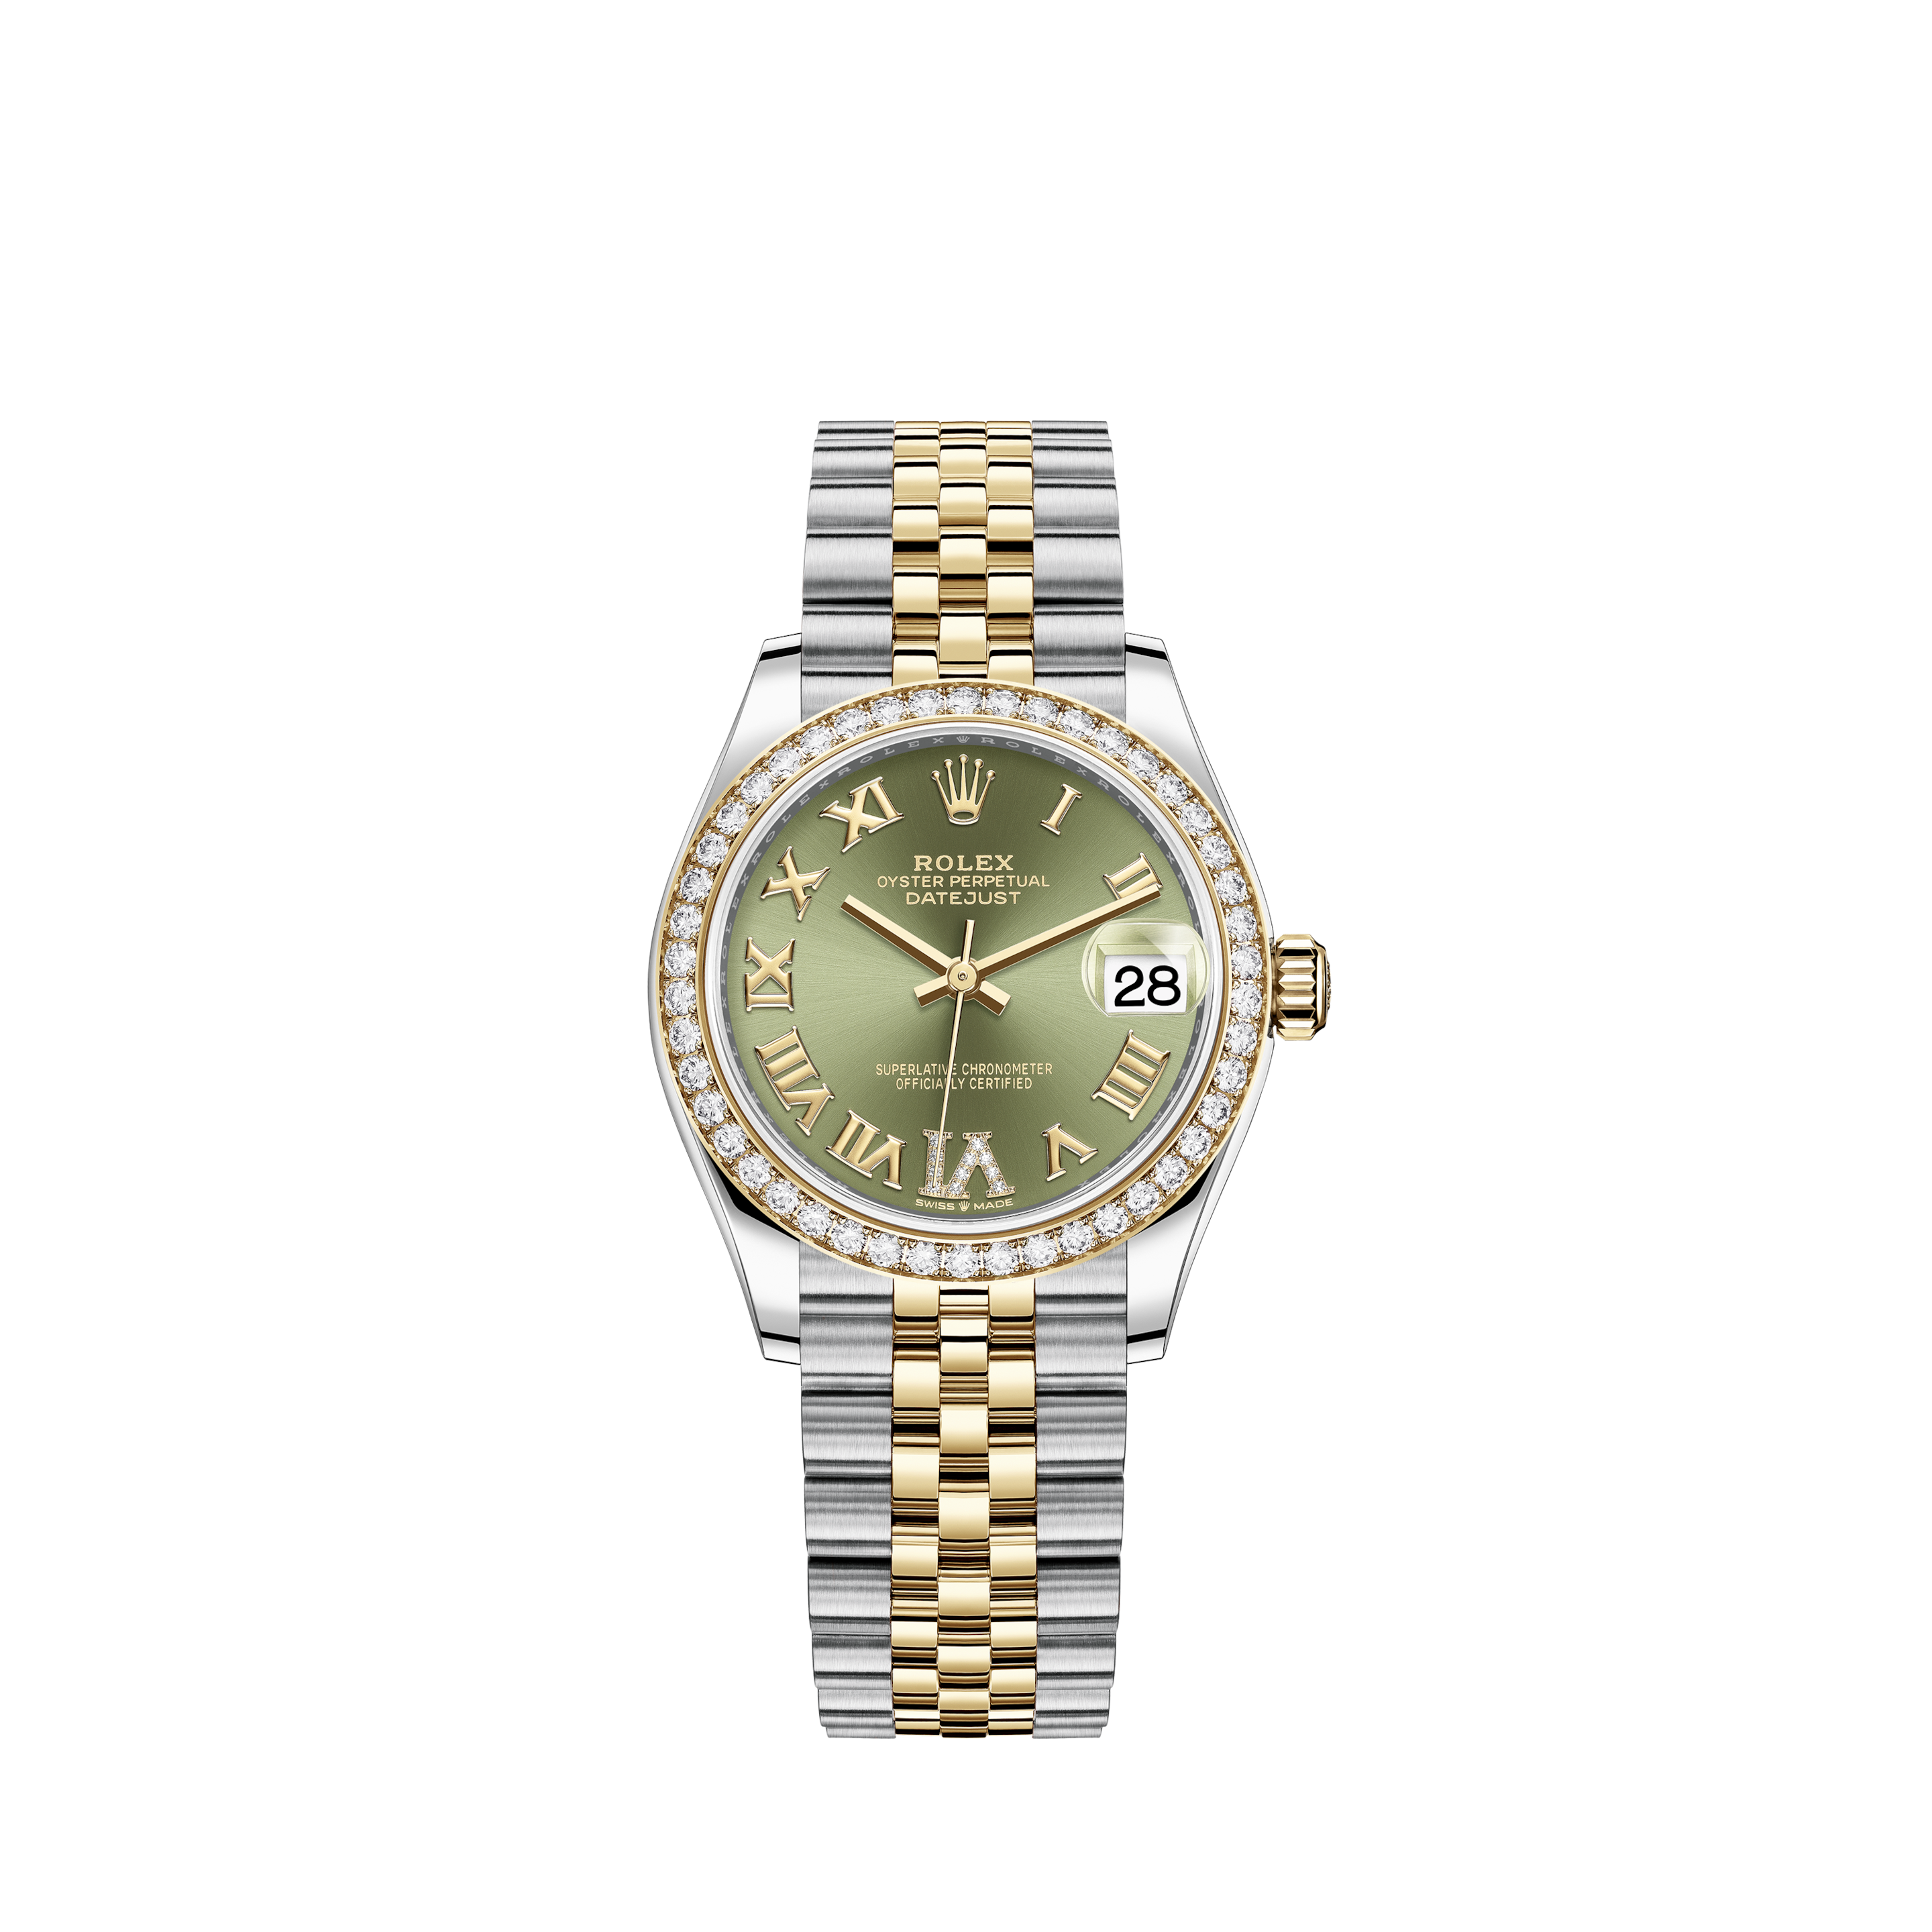 Rolex Men's Rolex 36mm Datejust Two Tone Vintage Fluted Bezel With Lugs Champagne Gold Jubilee Roman Numeral DialRolex Men's Rolex 36mm Datejust Two Tone Vintage Fluted Bezel With Lugs Chocolate Dial with Accent